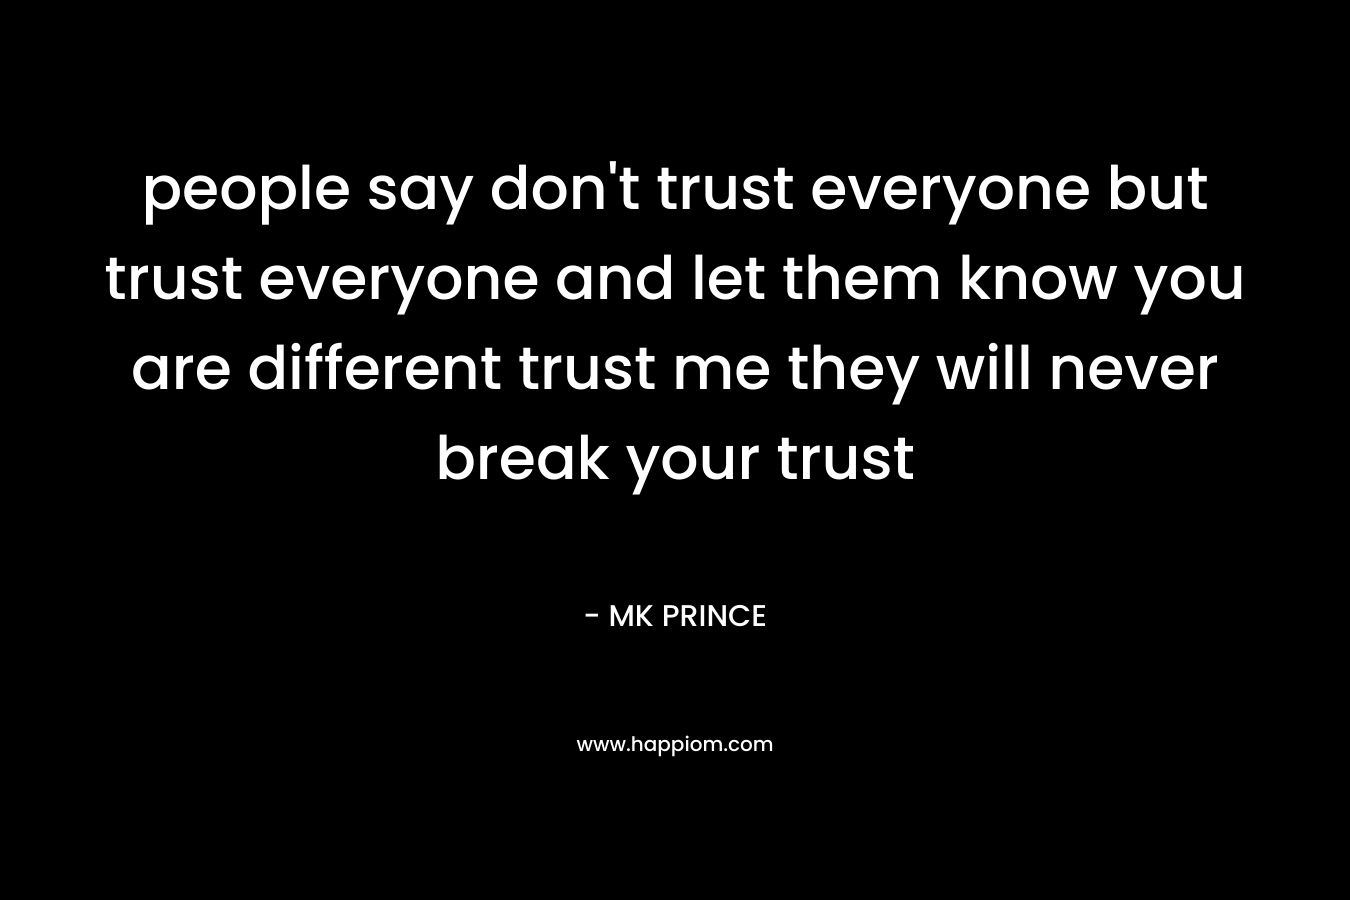 people say don't trust everyone but trust everyone and let them know you are different trust me they will never break your trust